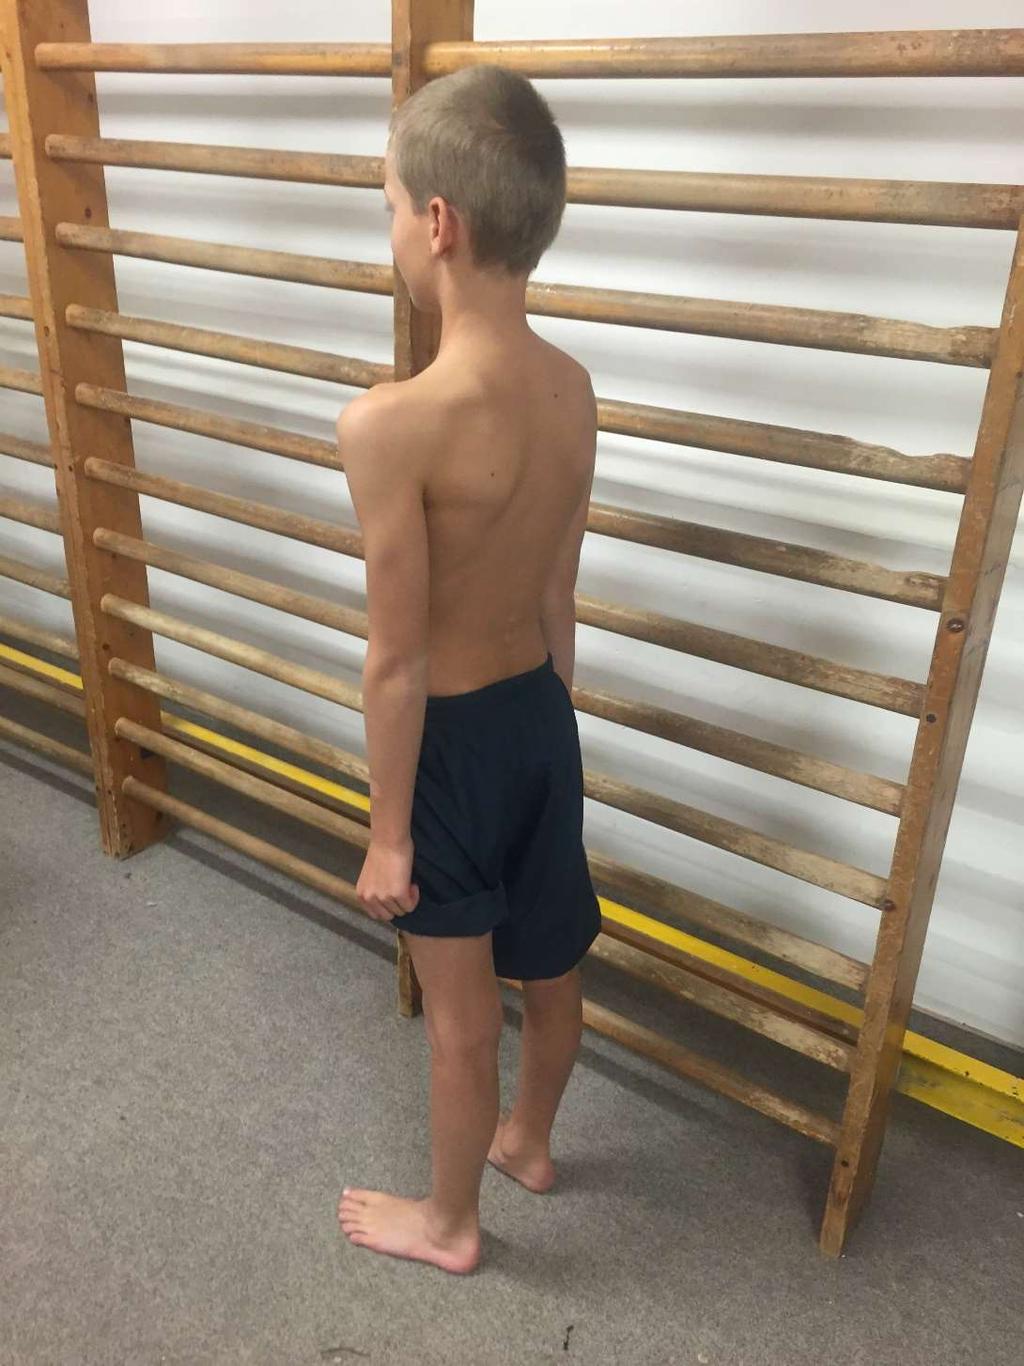 Murrell GA. Shoulder pain in elite swimmers: primarily due to swim-volume-induced supraspinatus tendinopathy. Br J Sports Med. 2010 Feb;44(2):105-13.